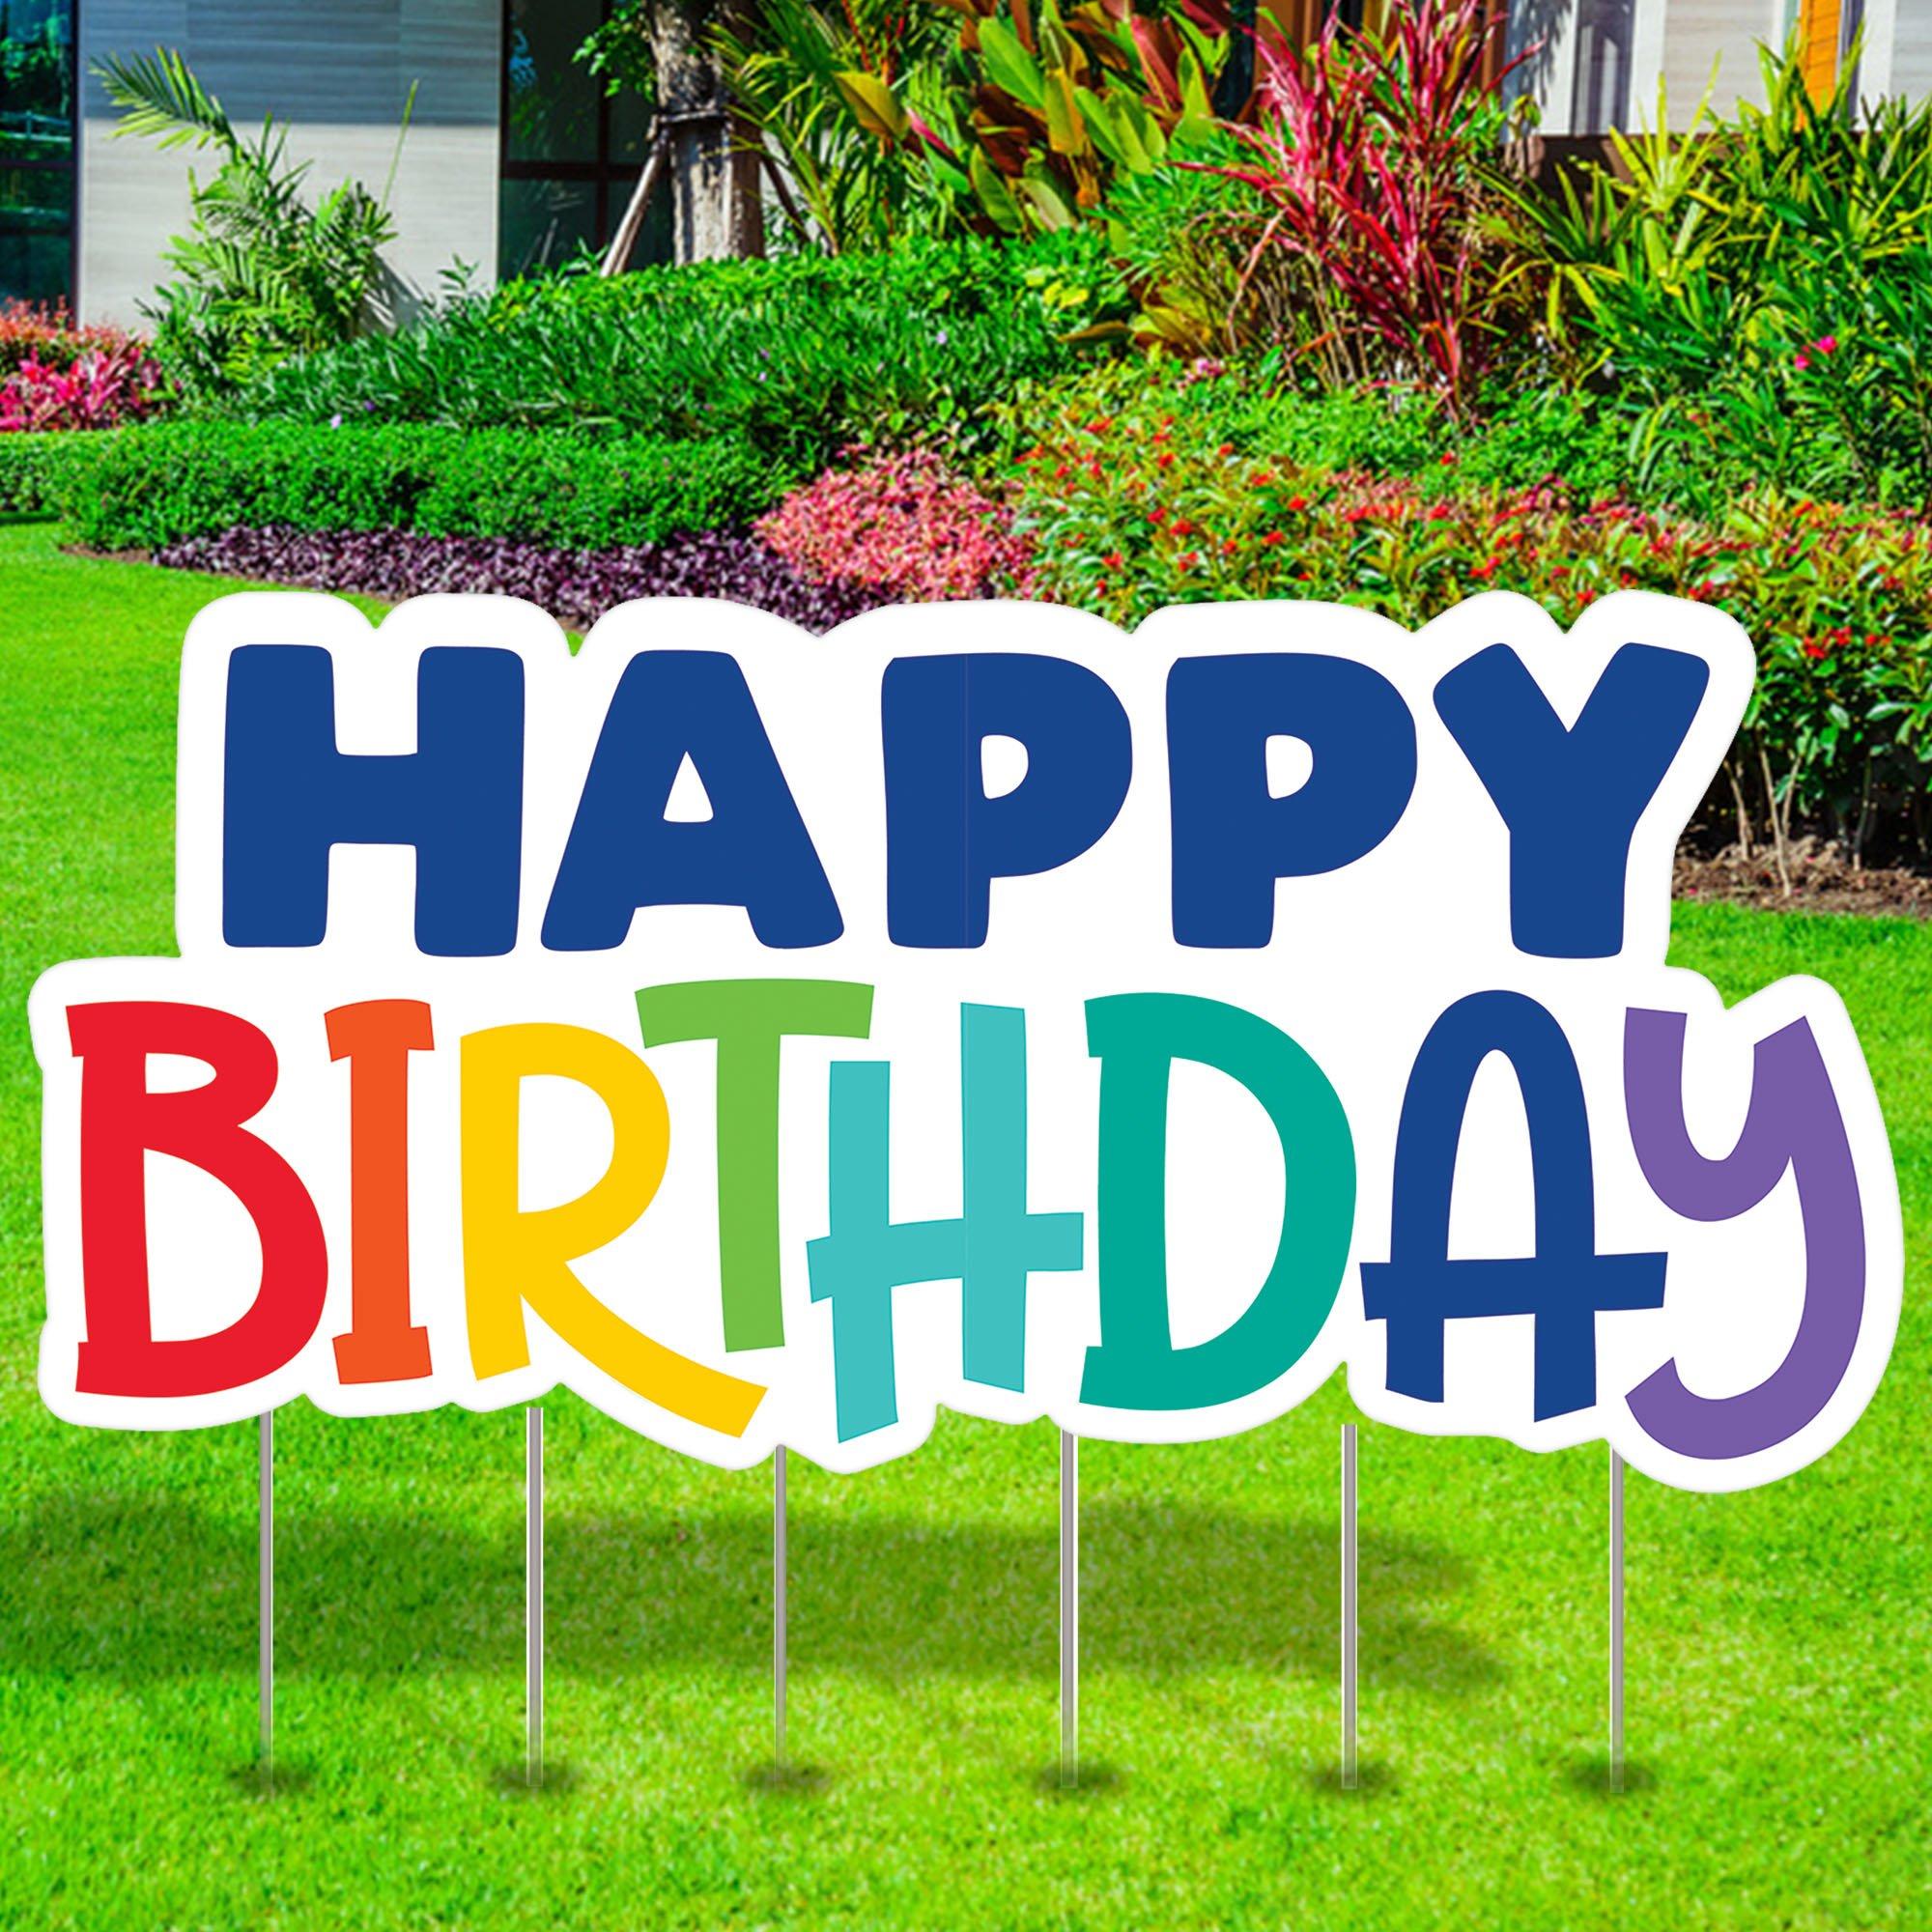 Happy Birthday Corrugated Plastic Yard Sign, 67in x 32.5in | Party City